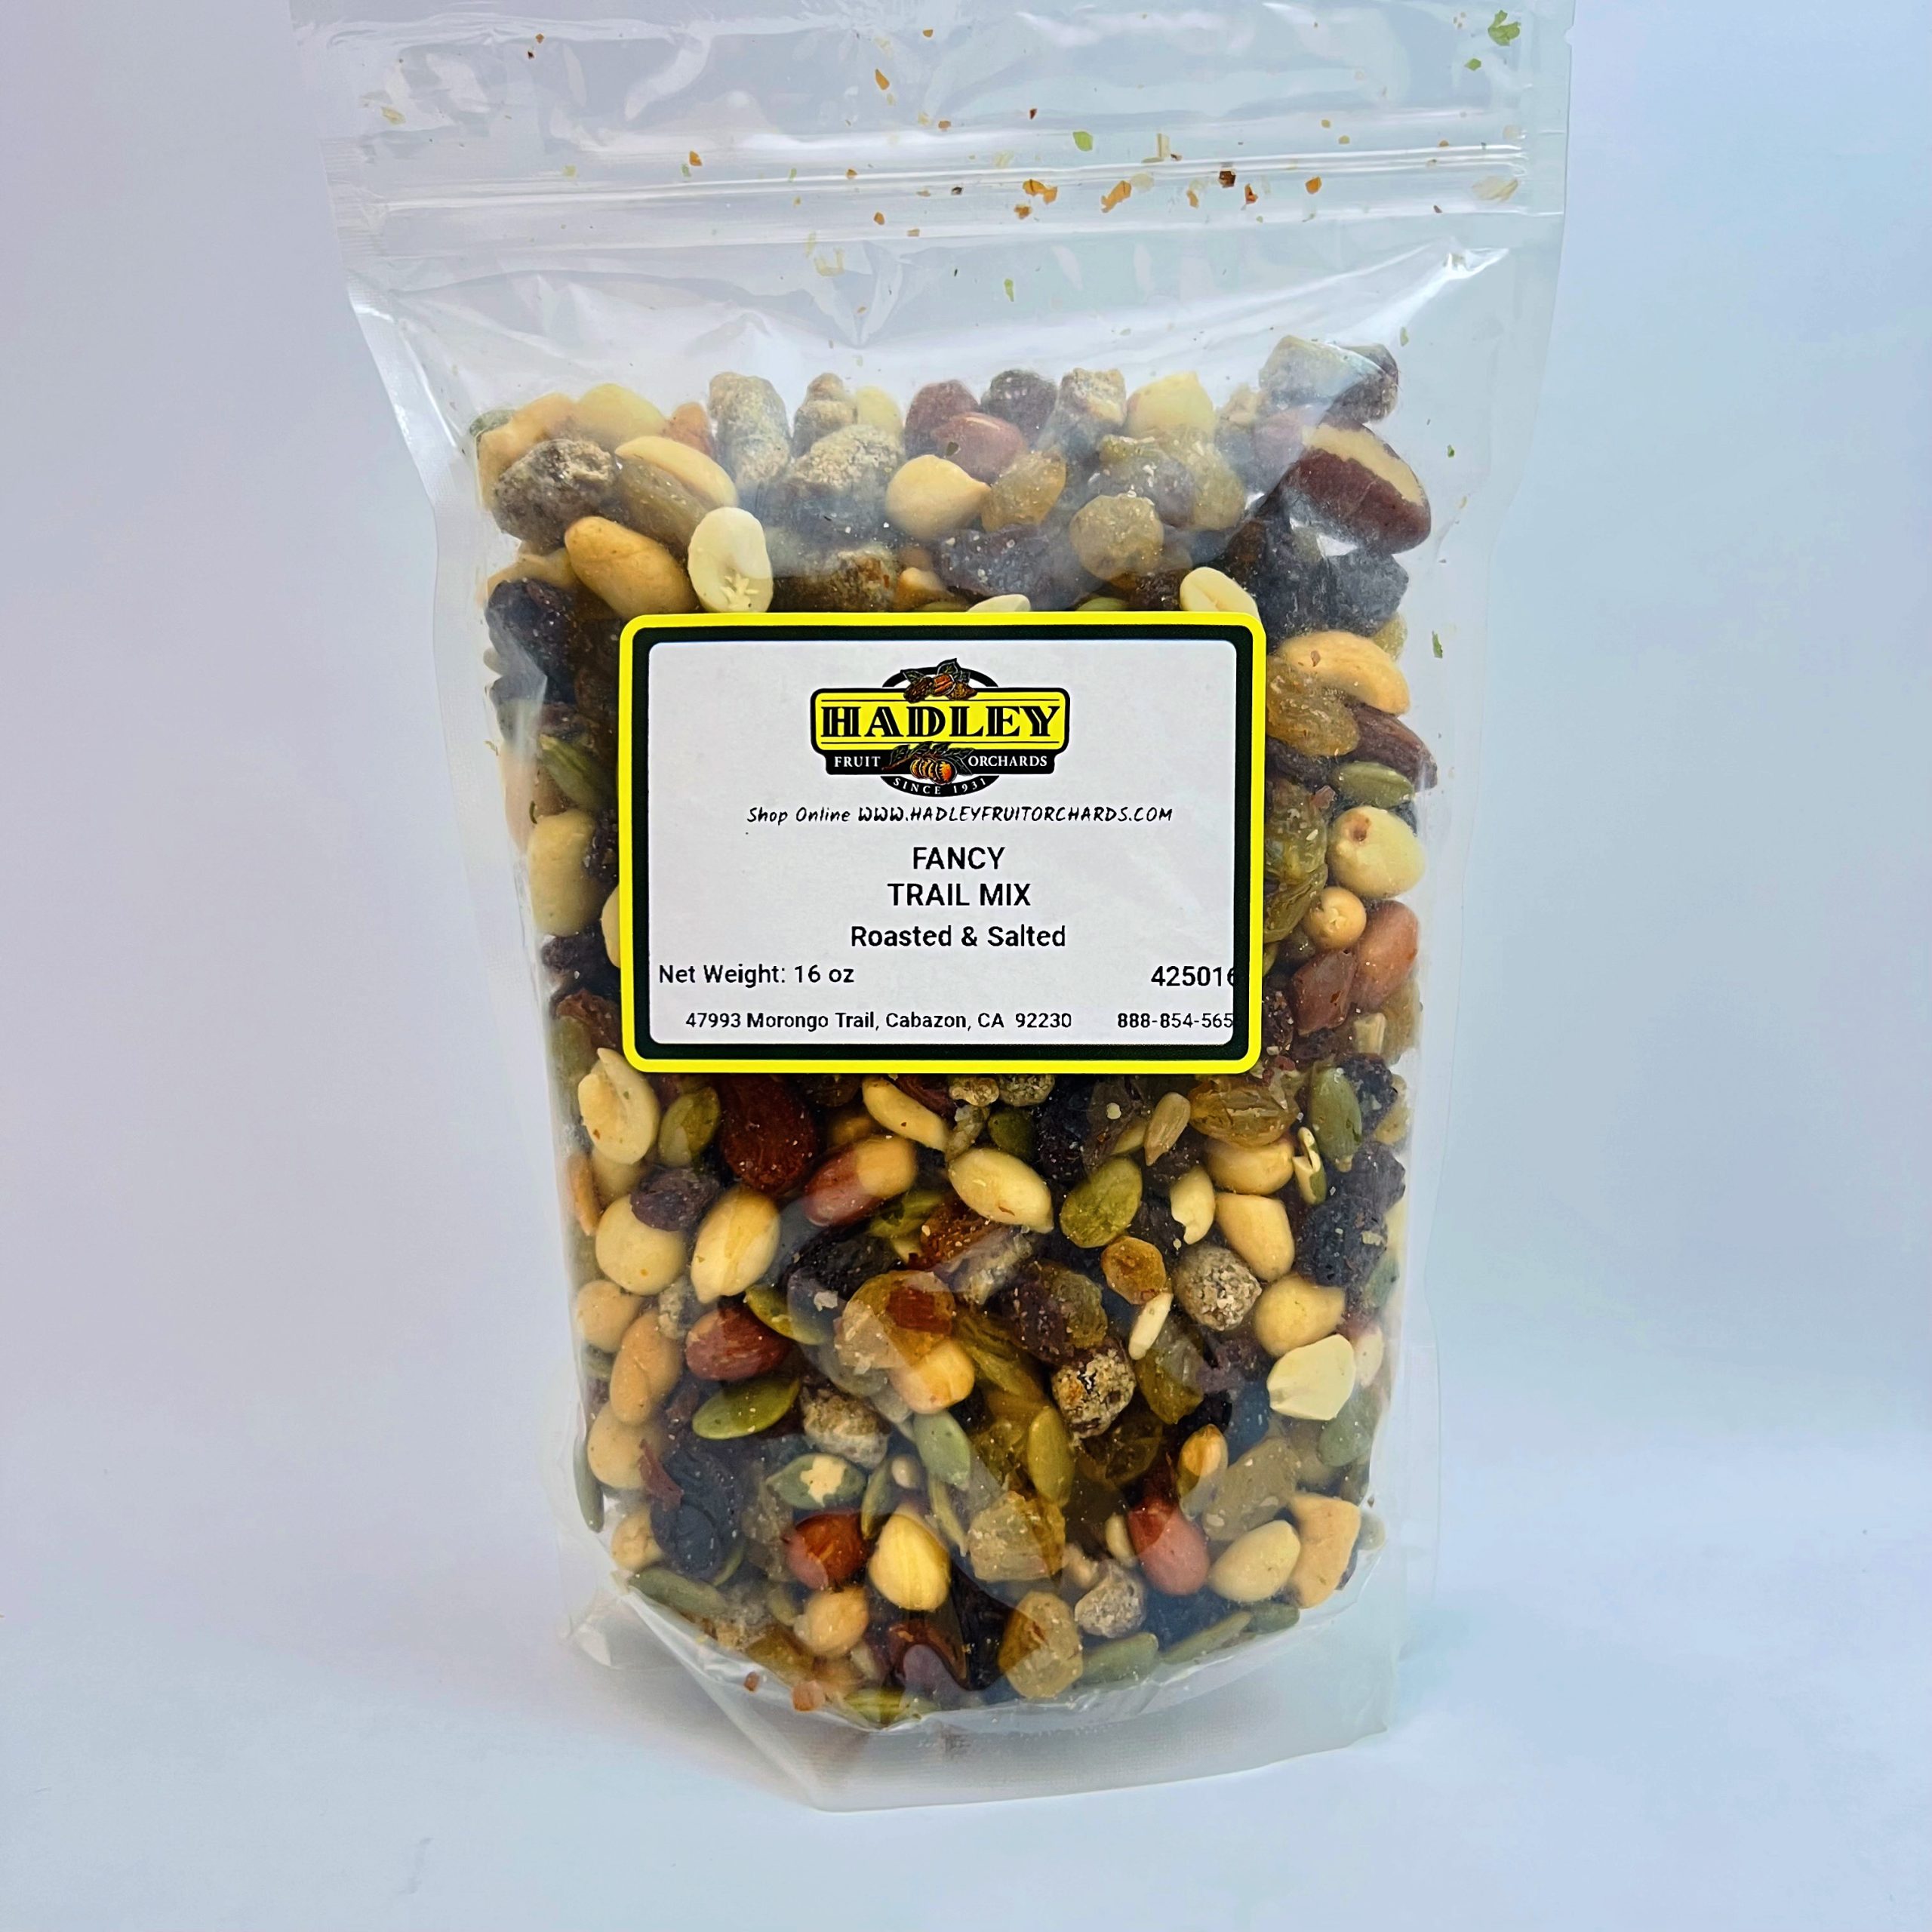 Fancy Trail Mix Roasted & Salted 16oz